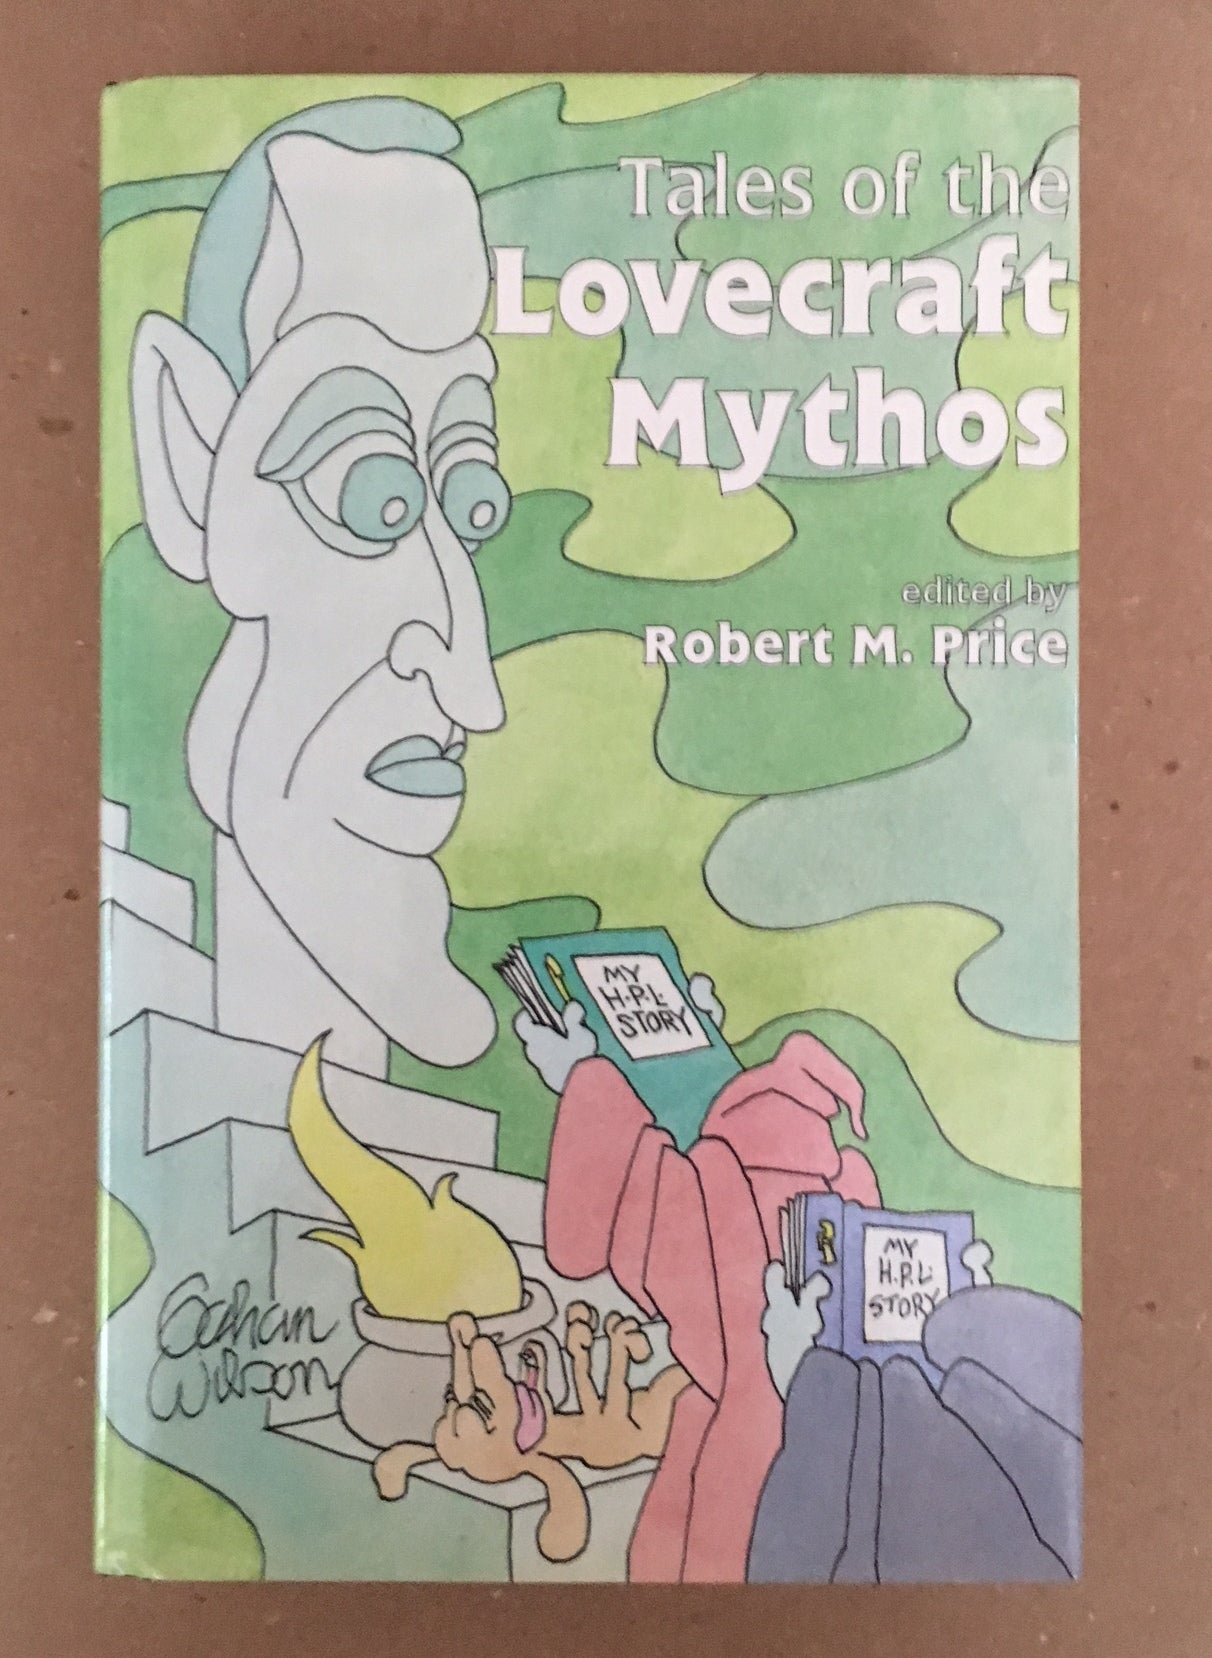 Tales Of The Lovecraft Mythos - Edited by Robert M. Price (Fedogan & Bremer HC)